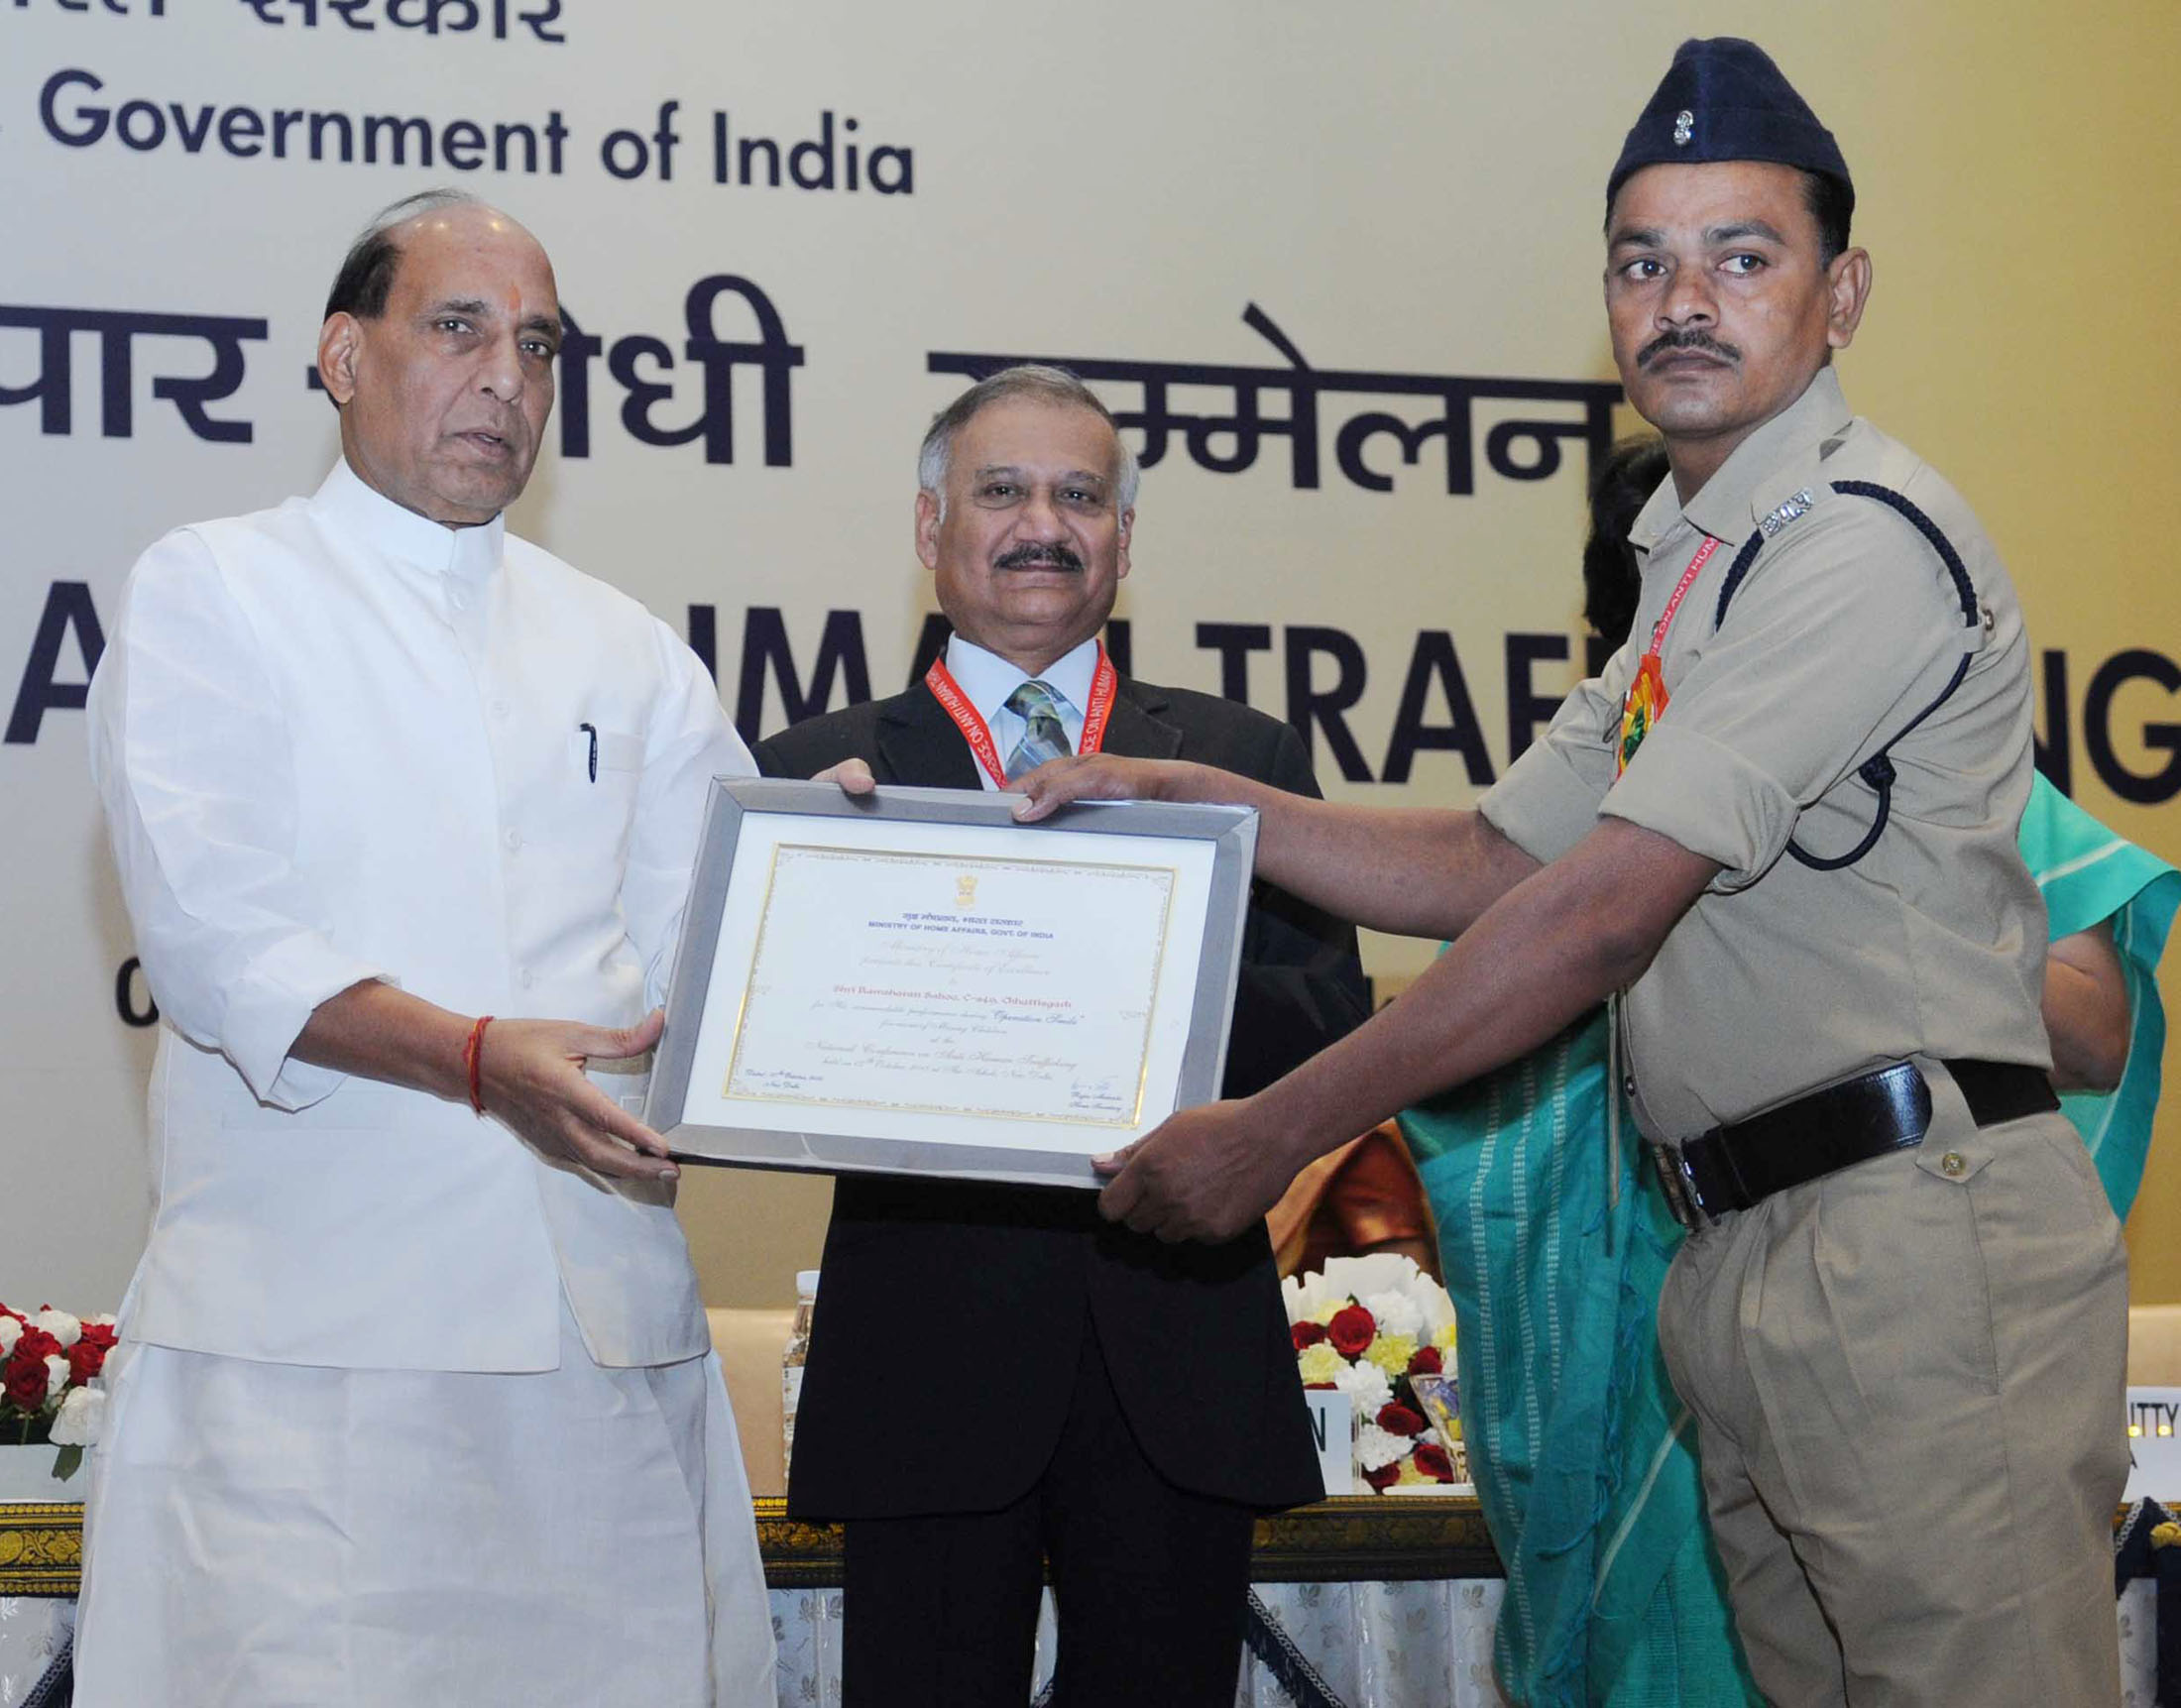 The Union Home Minister, Shri Rajnath Singh presented the certificates to top performers of Operation Smile, at the inauguration of the National Conference on Anti Human Trafficking, in New Delhi on October 07, 2015. 	The Director, CBI, Shri Anil Kumar Sinha is also seen.